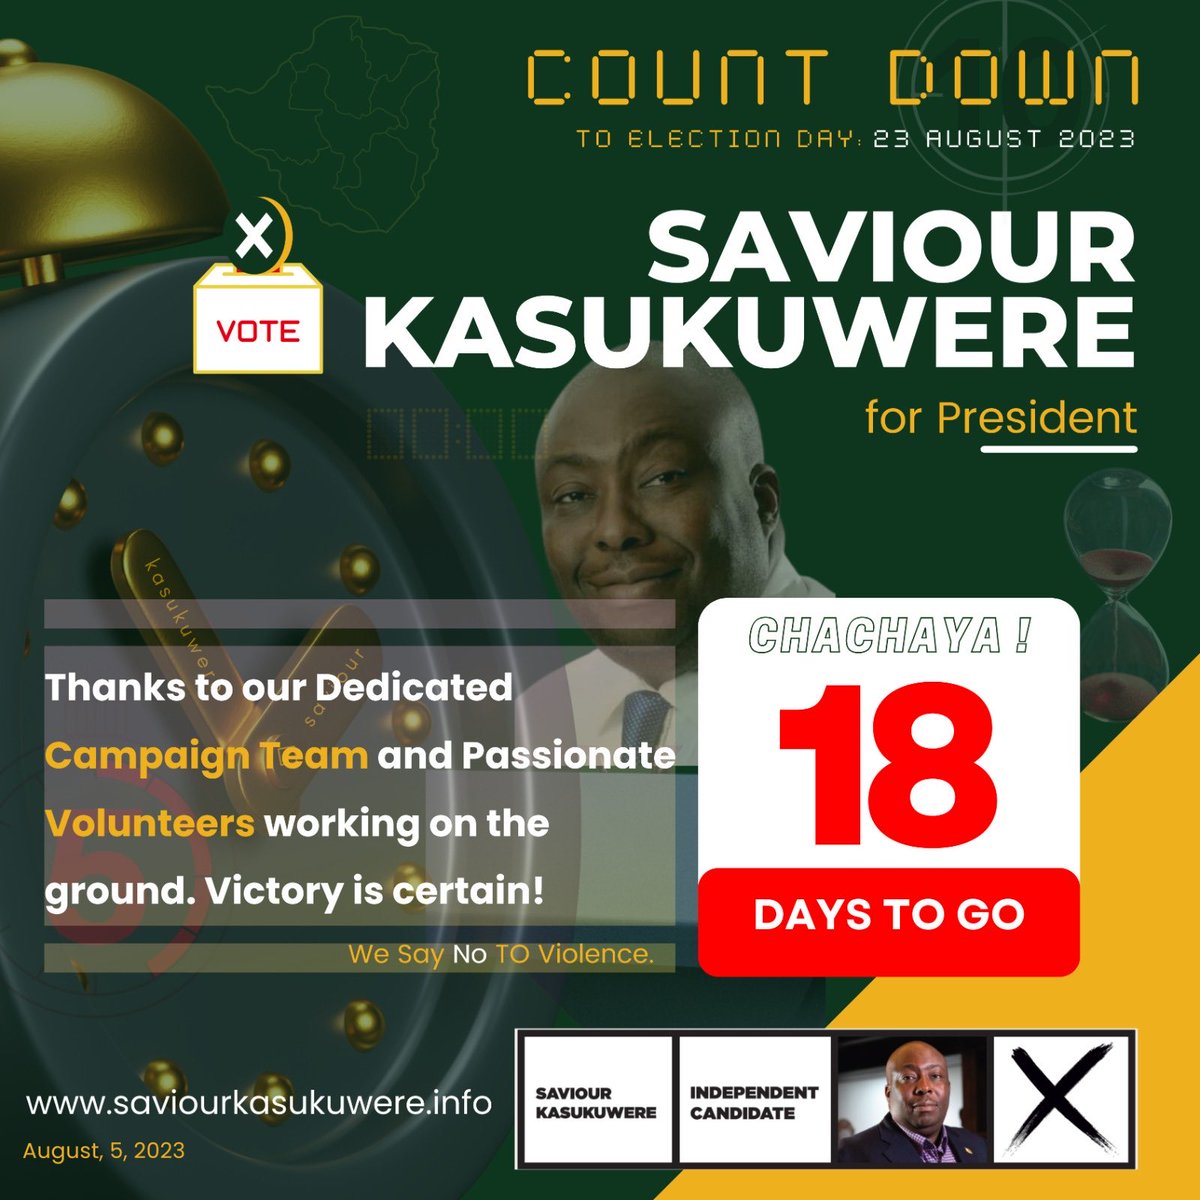 Let's get ready #23August #WeVote #Saviour #Kasukuwere